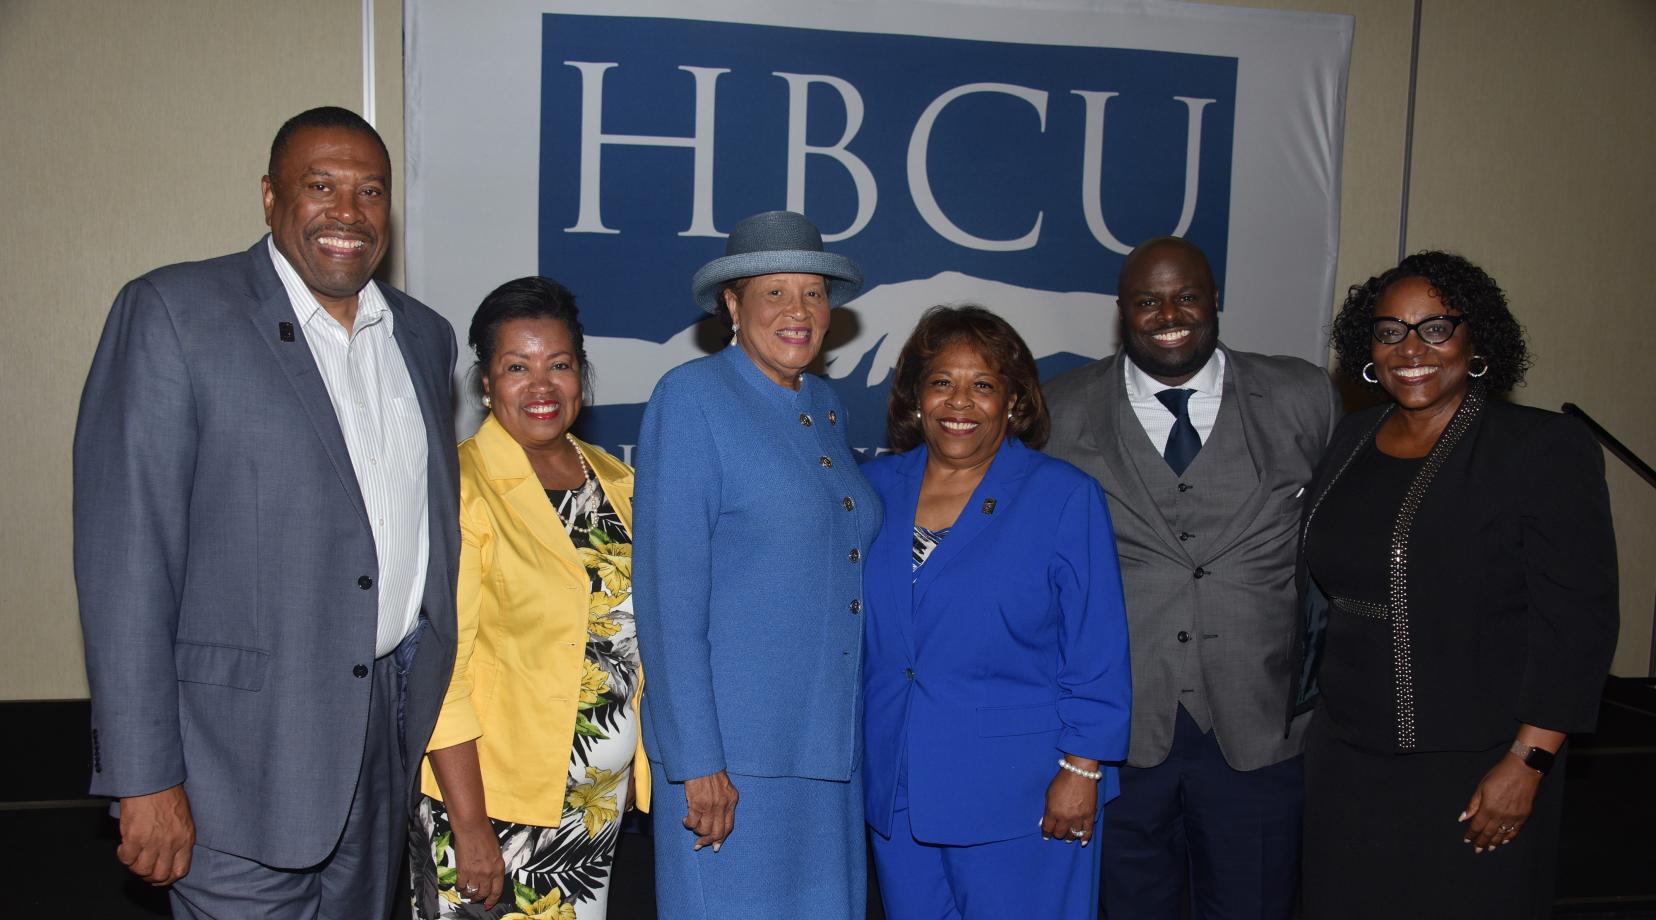 <p>(L-r) John Ridgeway and Dr. Devona Williams, University Board vice chair and chair, respectively, keynote speaker U.S. Rep. Alma Adams, University President Wilma Mishoe, Provost Tony Allen, and Dr. Vita Pickrum, vice president of Institutional Advancement, take a photo moment at the 9th annual Philanthropy Symposium hosted by Delaware State University.</p>
